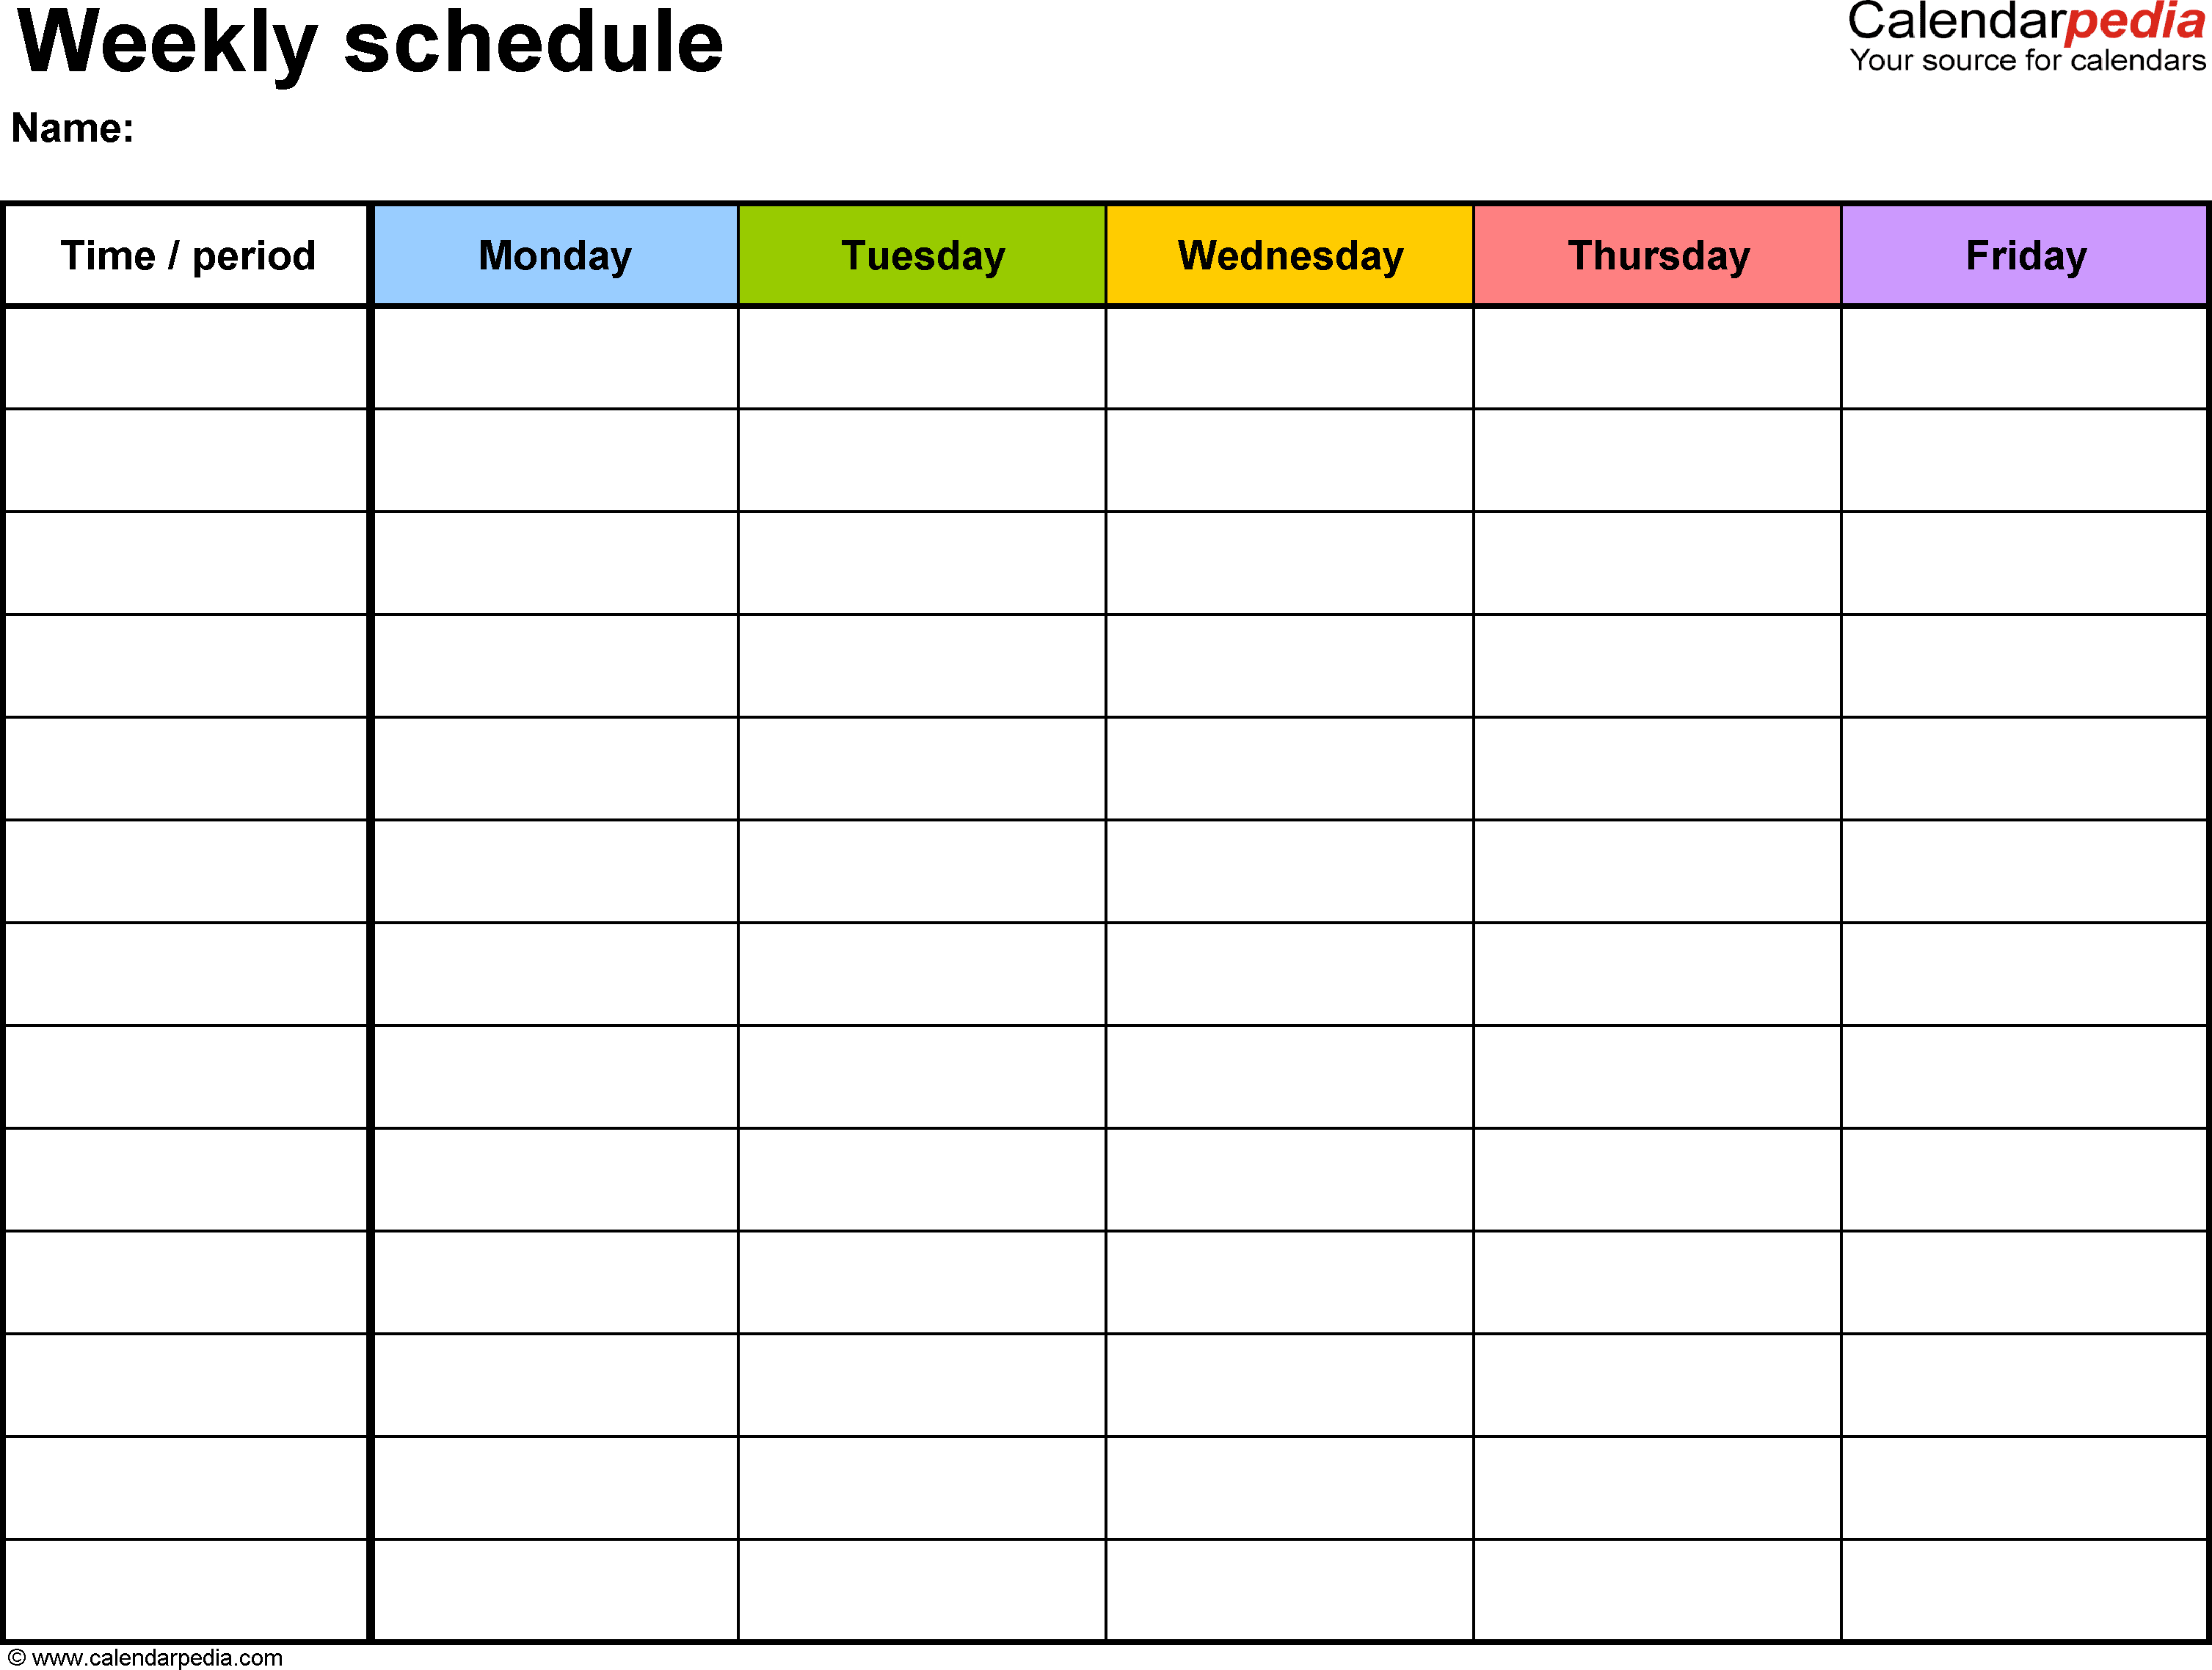 Free Weekly Schedule Templates For Word - 18 Templates - Free Printable Blank Weekly Schedule